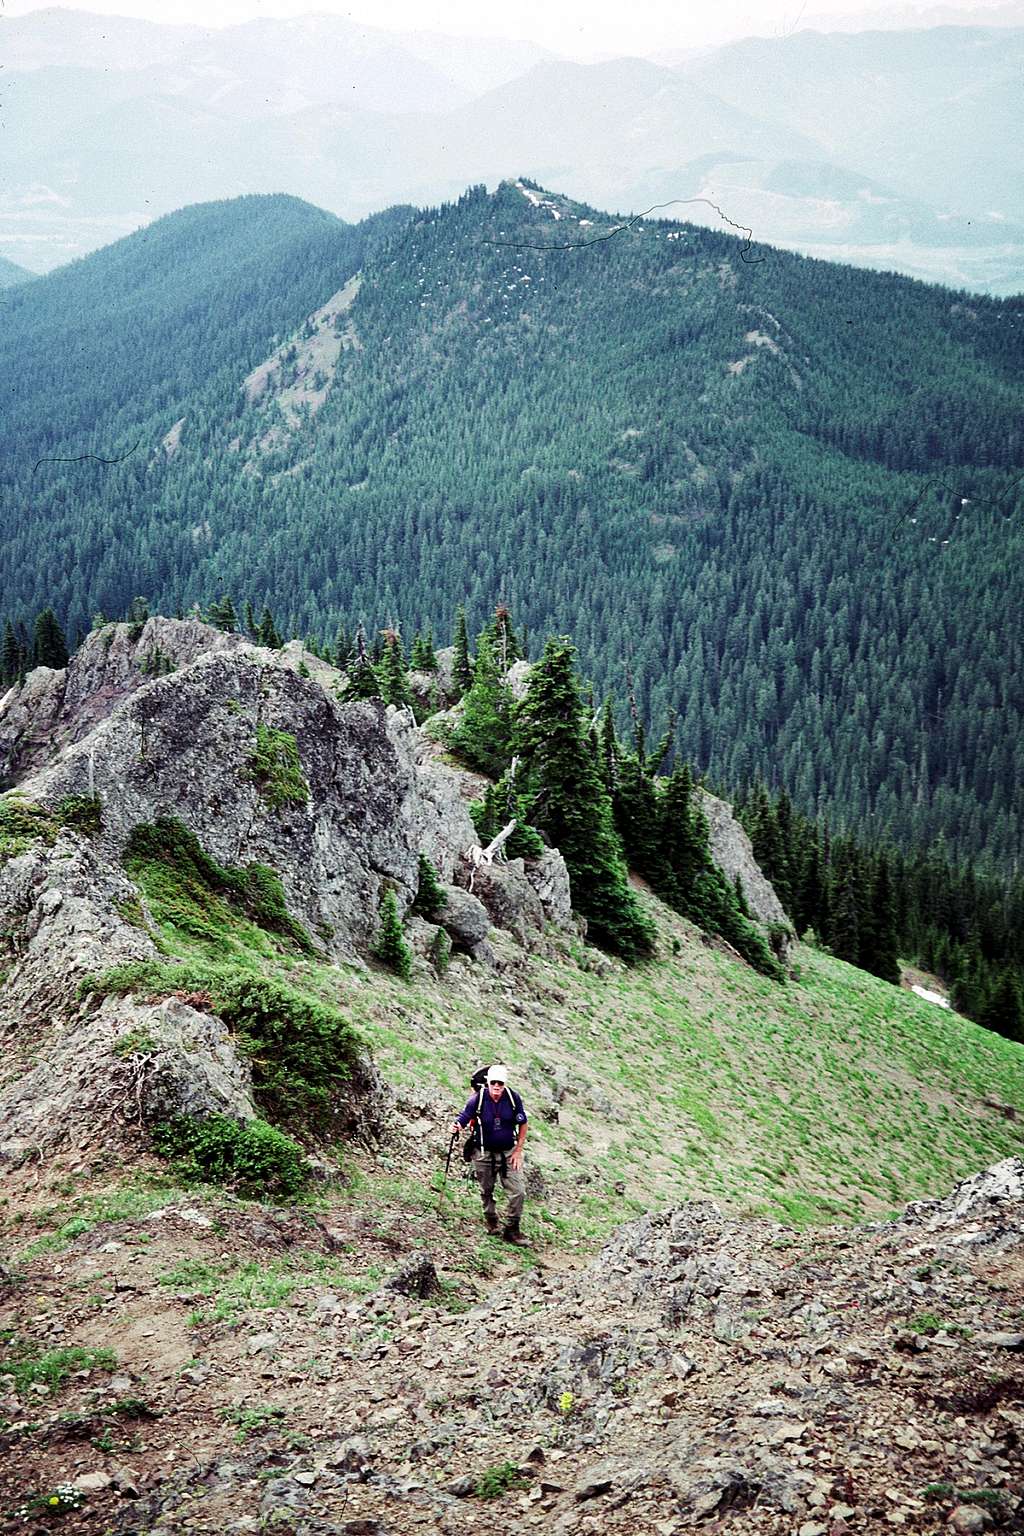 Typical Terrain on the South Ridge